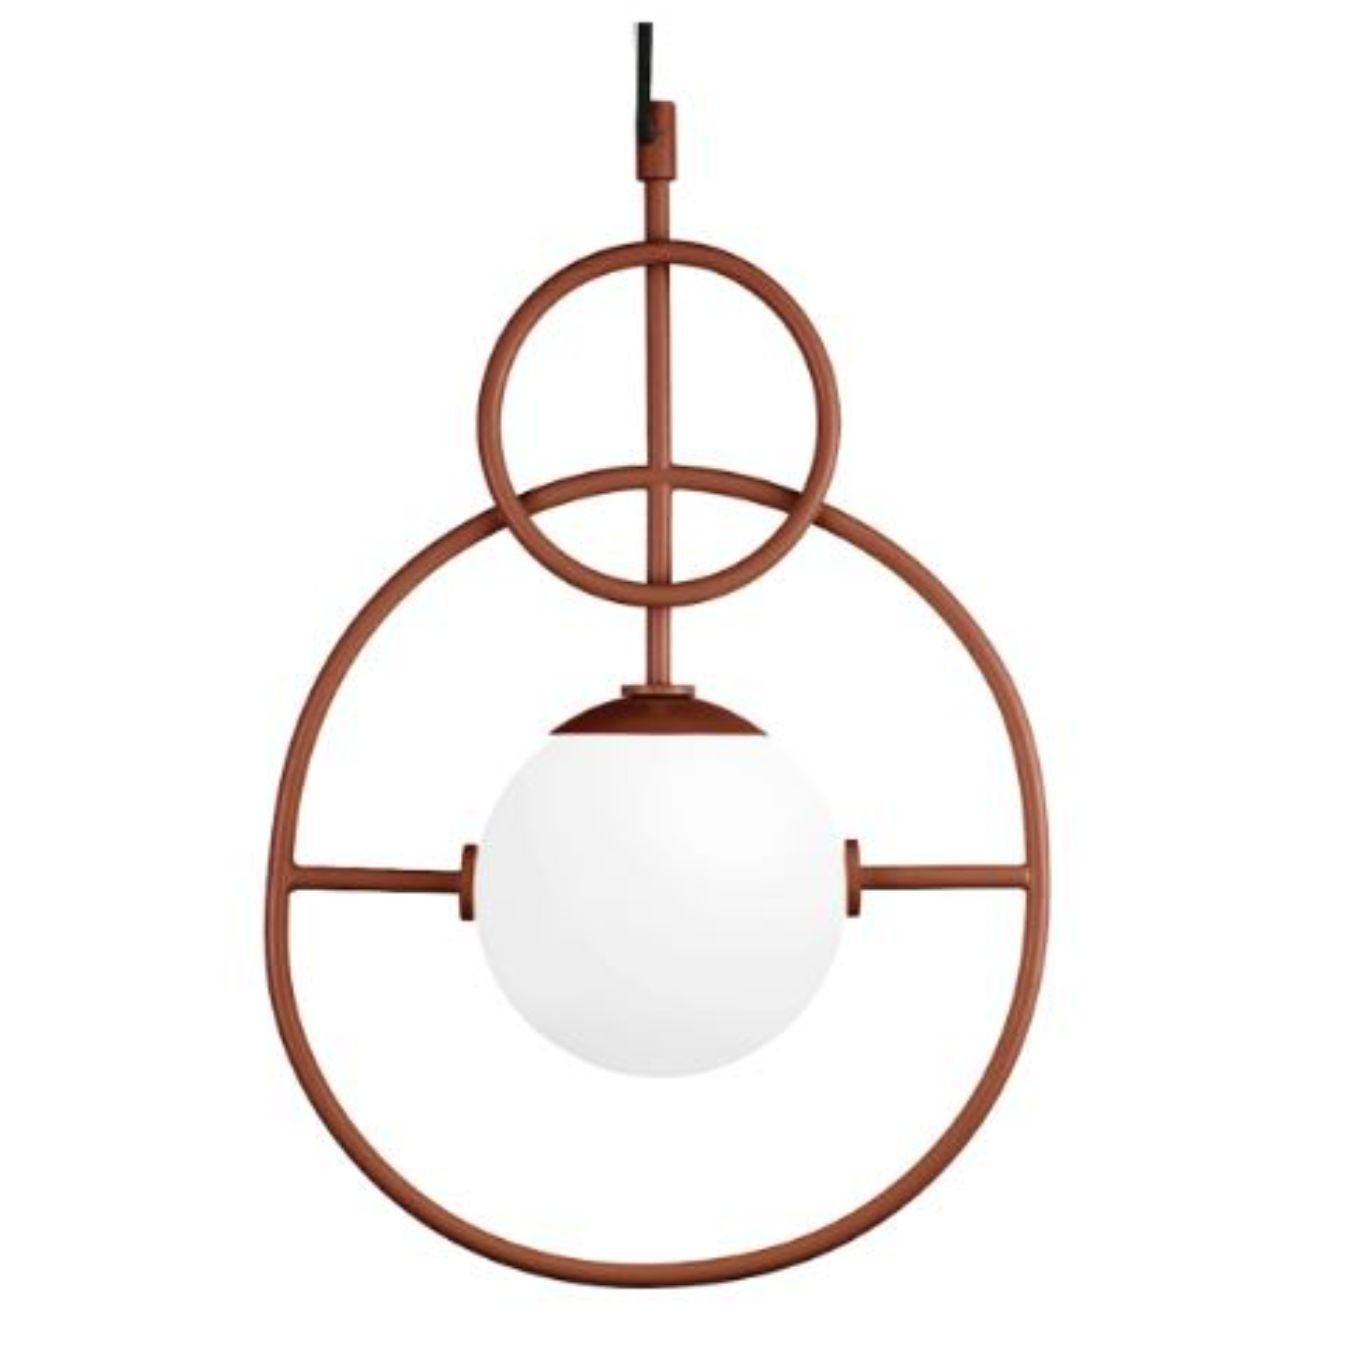 Copper Loop II suspension lamp by Dooq
Dimensions: W 31 x D 15 x H 47 cm
Materials: lacquered metal, polished or brushed metal, copper.
Also available in different colours and materials.

Information:
230V/50Hz
1 x max. G9
4W LED

120V/60Hz
1 x max.